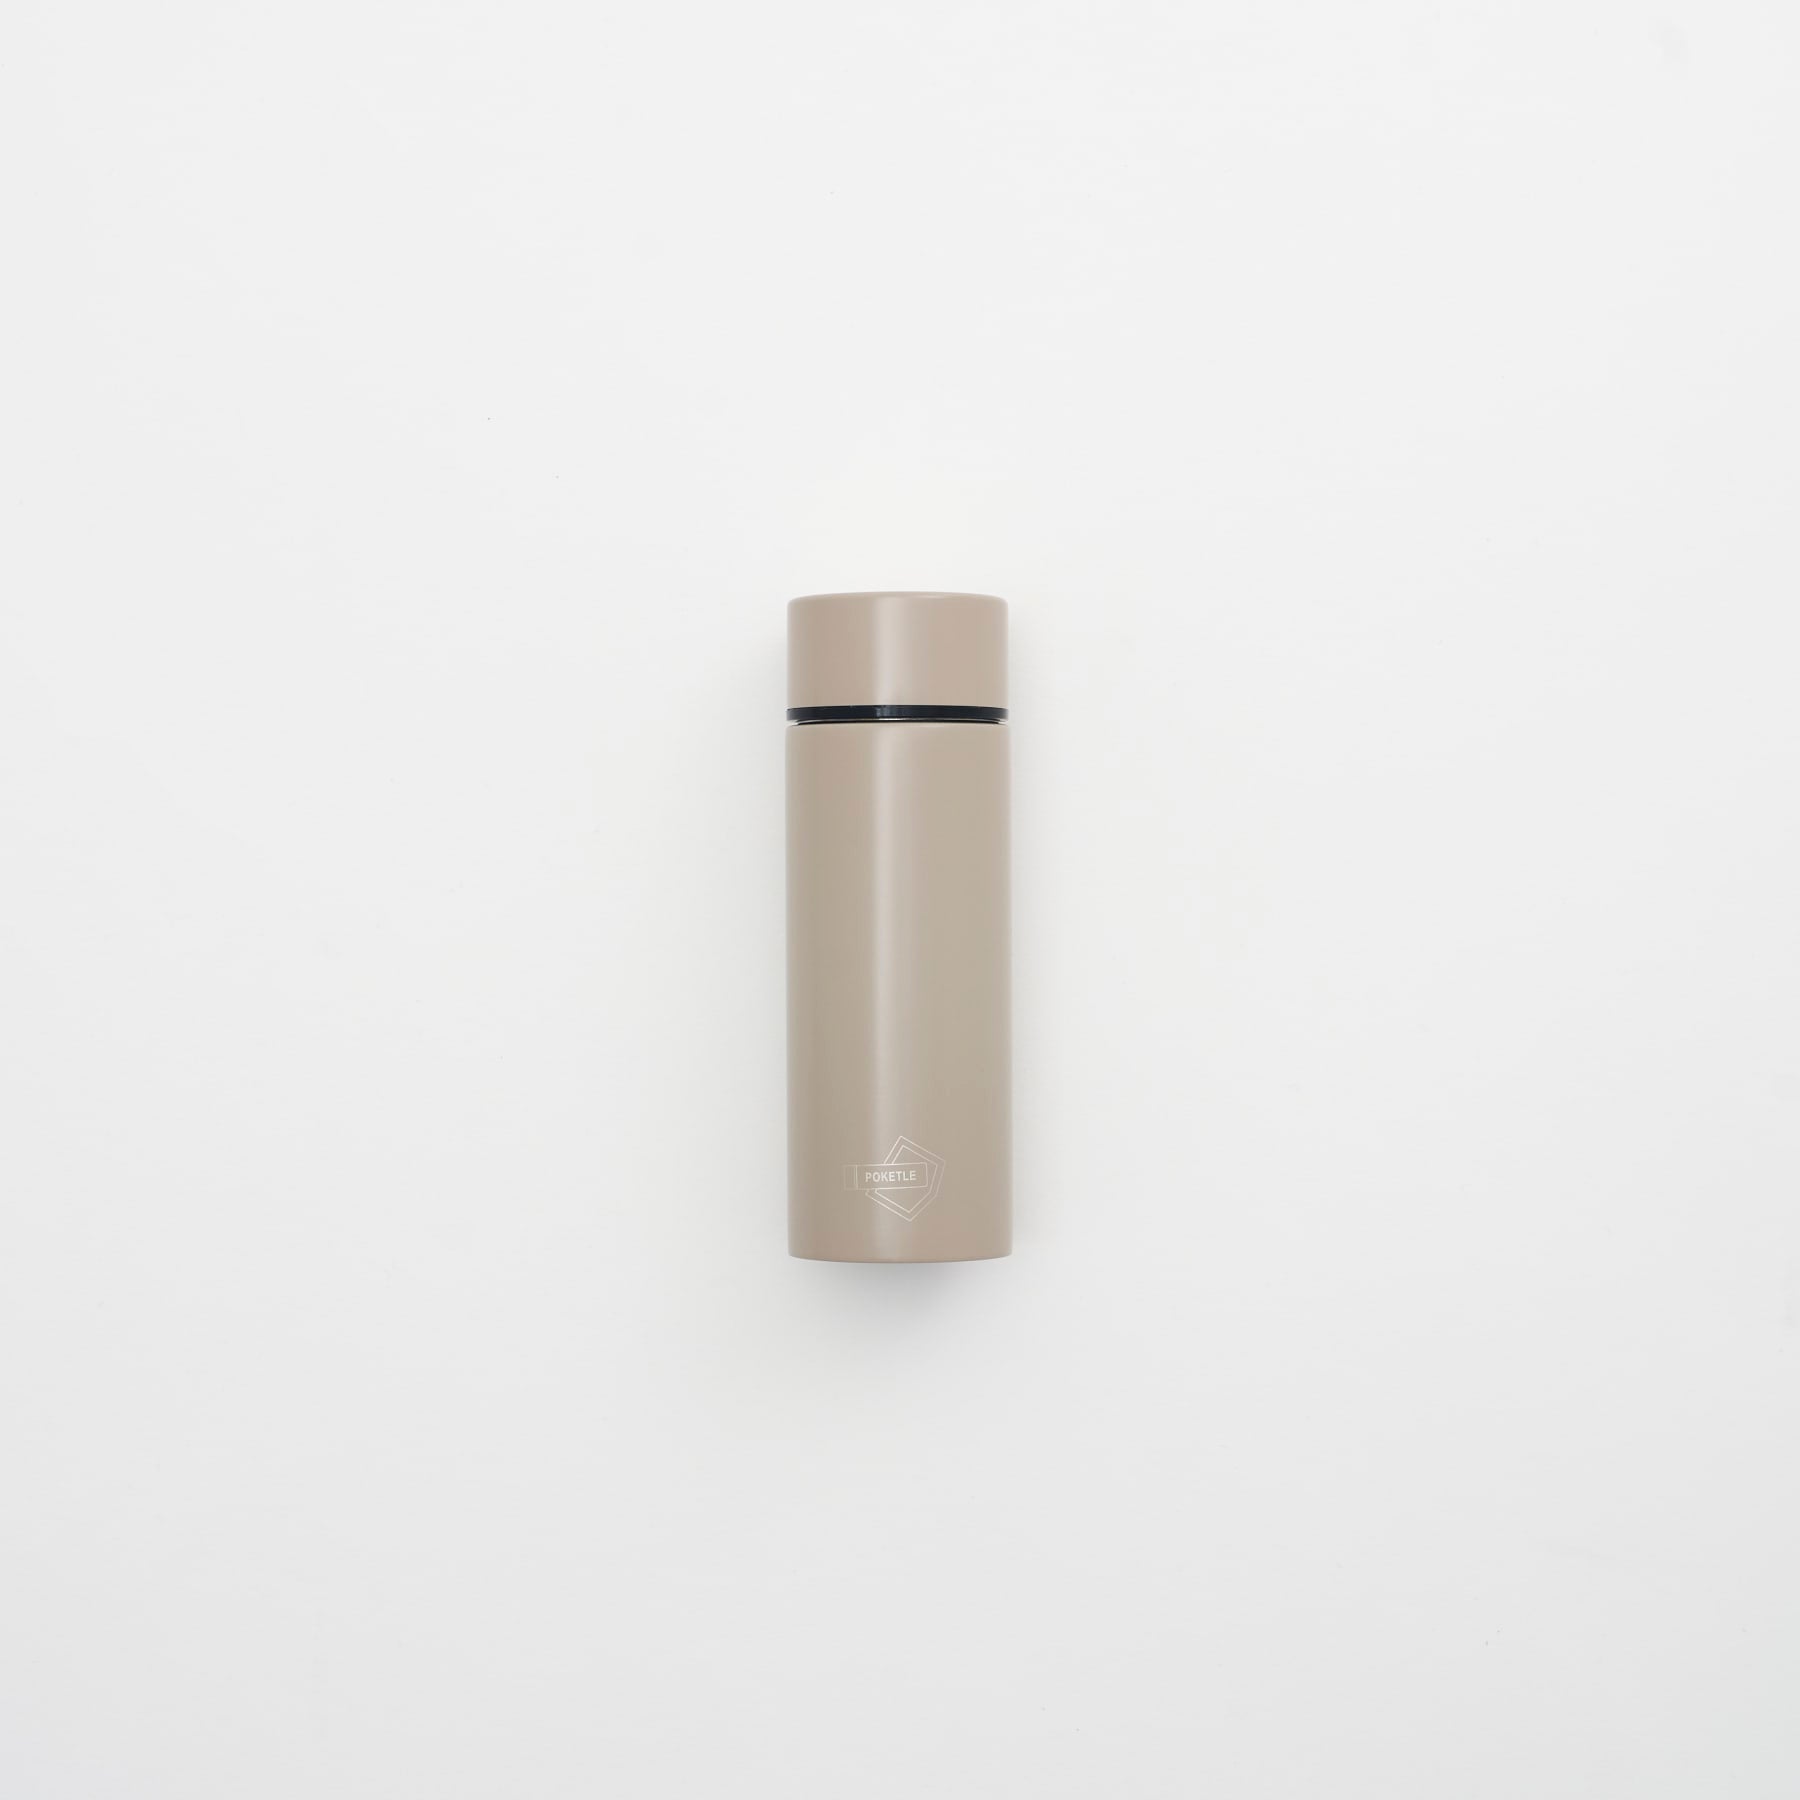 Pocketle Japanese thermos cup small